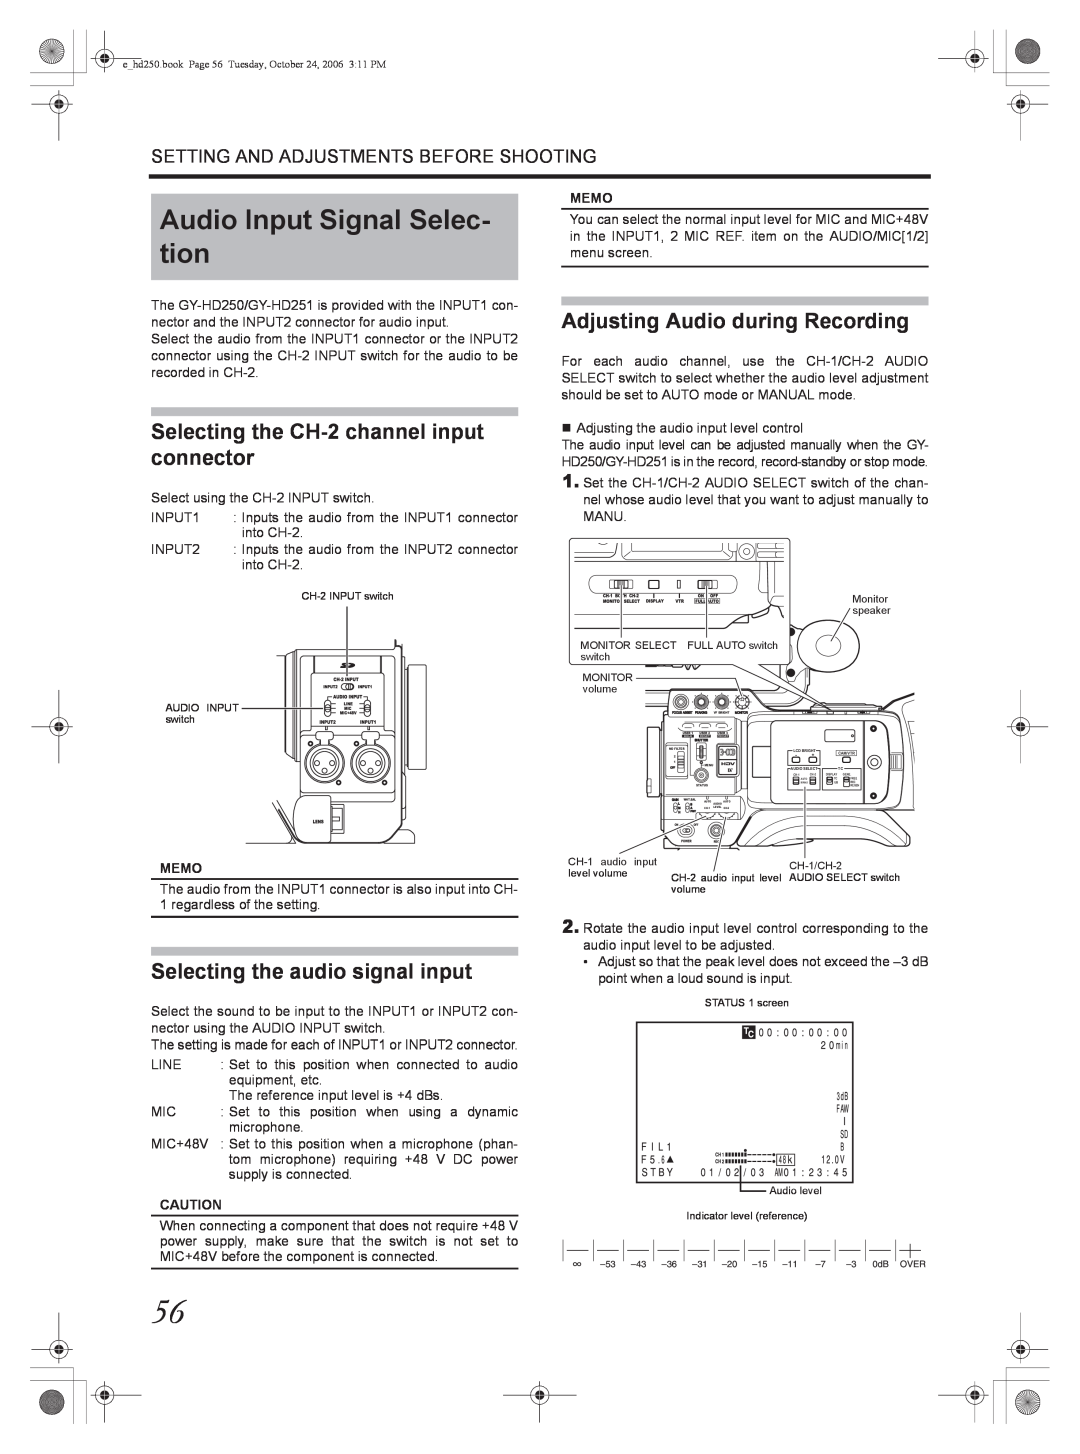 JVC GY-HD250 Audio Input Signal Selec- tion, Selecting the CH-2 channel input connector, Selecting the audio signal input 